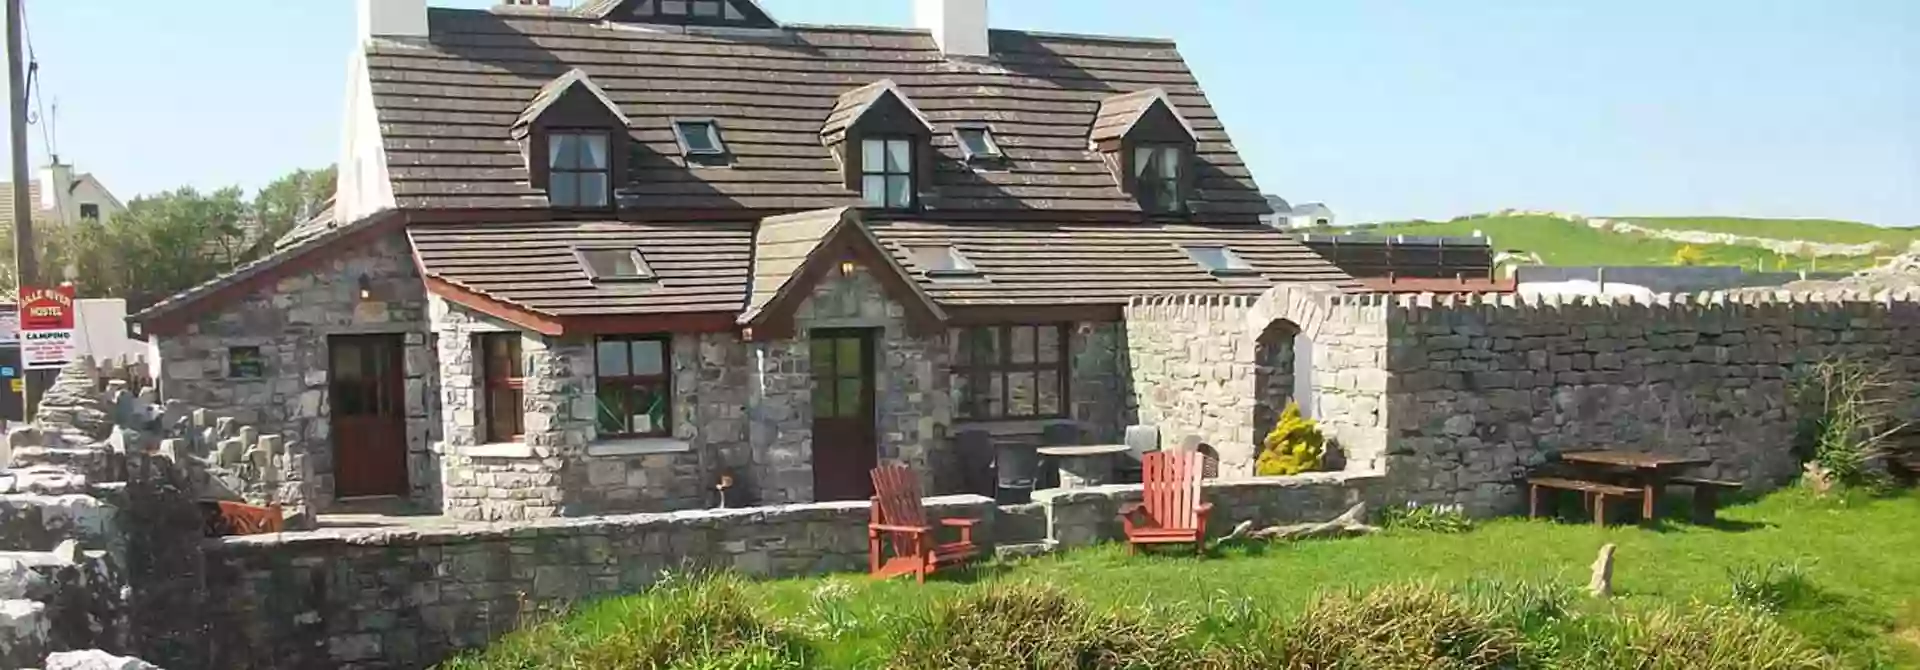 Aille River Tourist Hostel & Camping Doolin